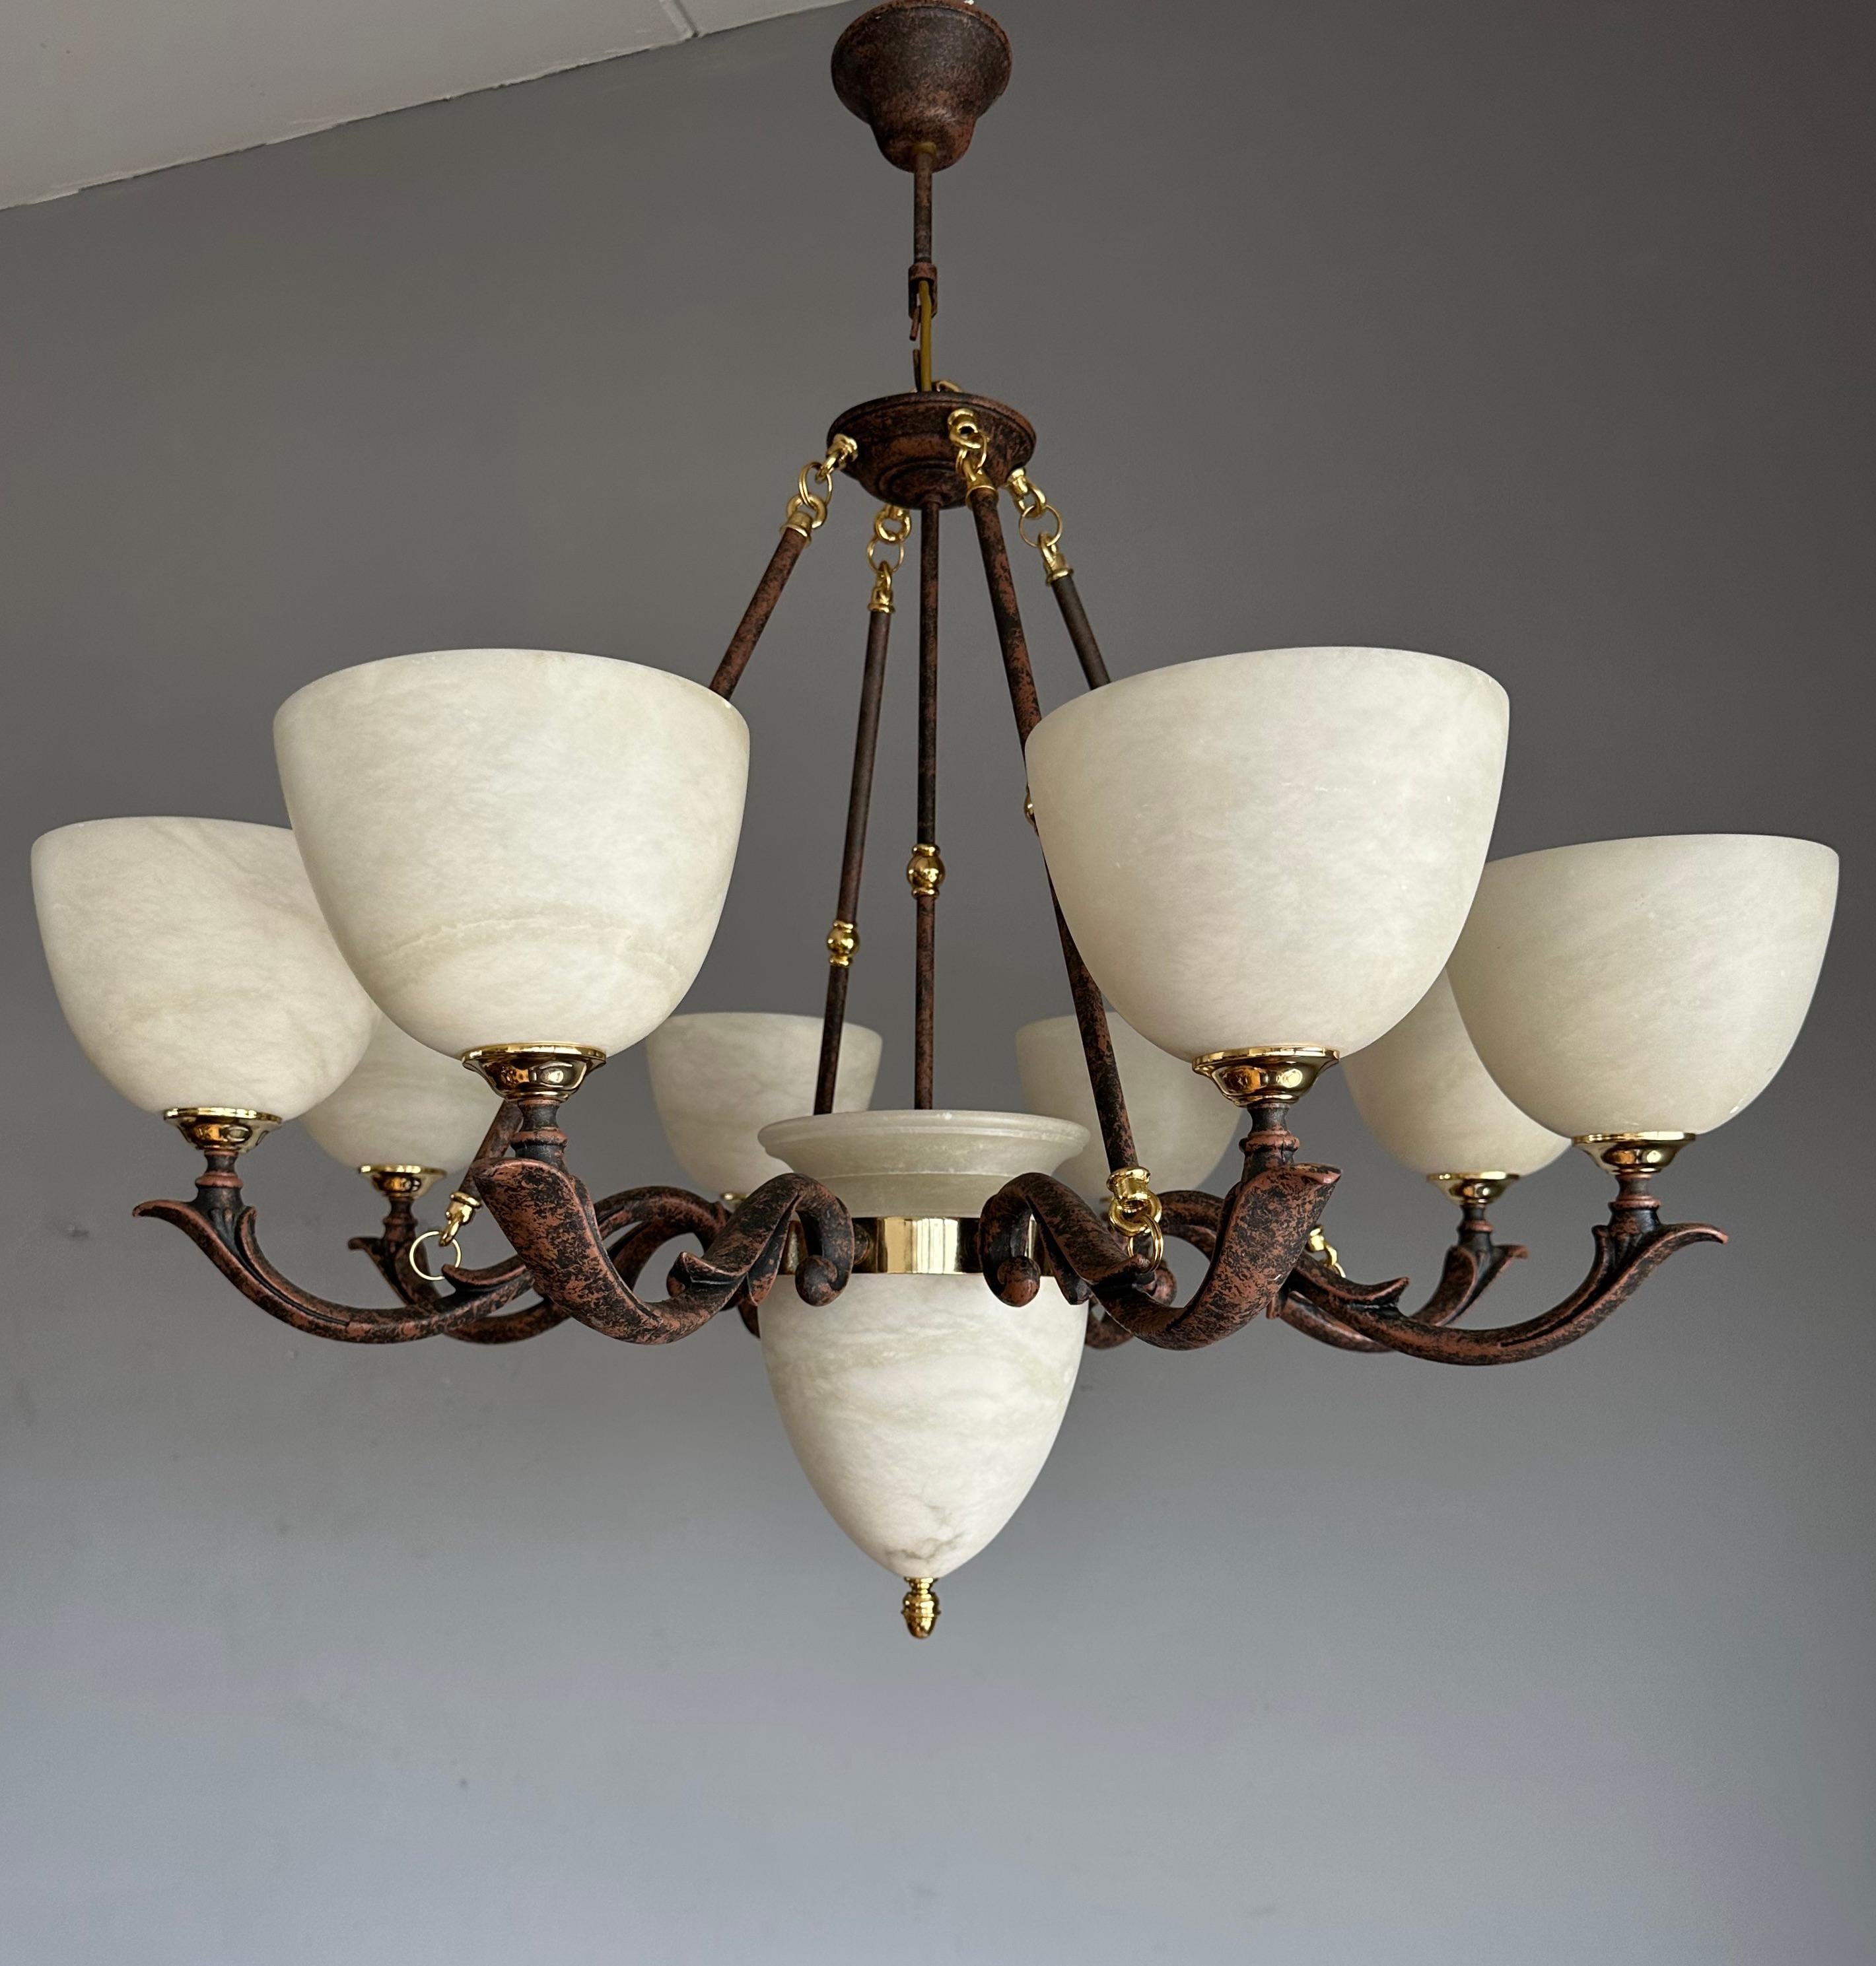 Vintage majestic, work-of-art light fixture.

With 20th century lighting in general (and alabaster fixtures in particular) as one of our specialities, we were again amazed to find a completely unique and highly stylish, alabaster chandelier. This